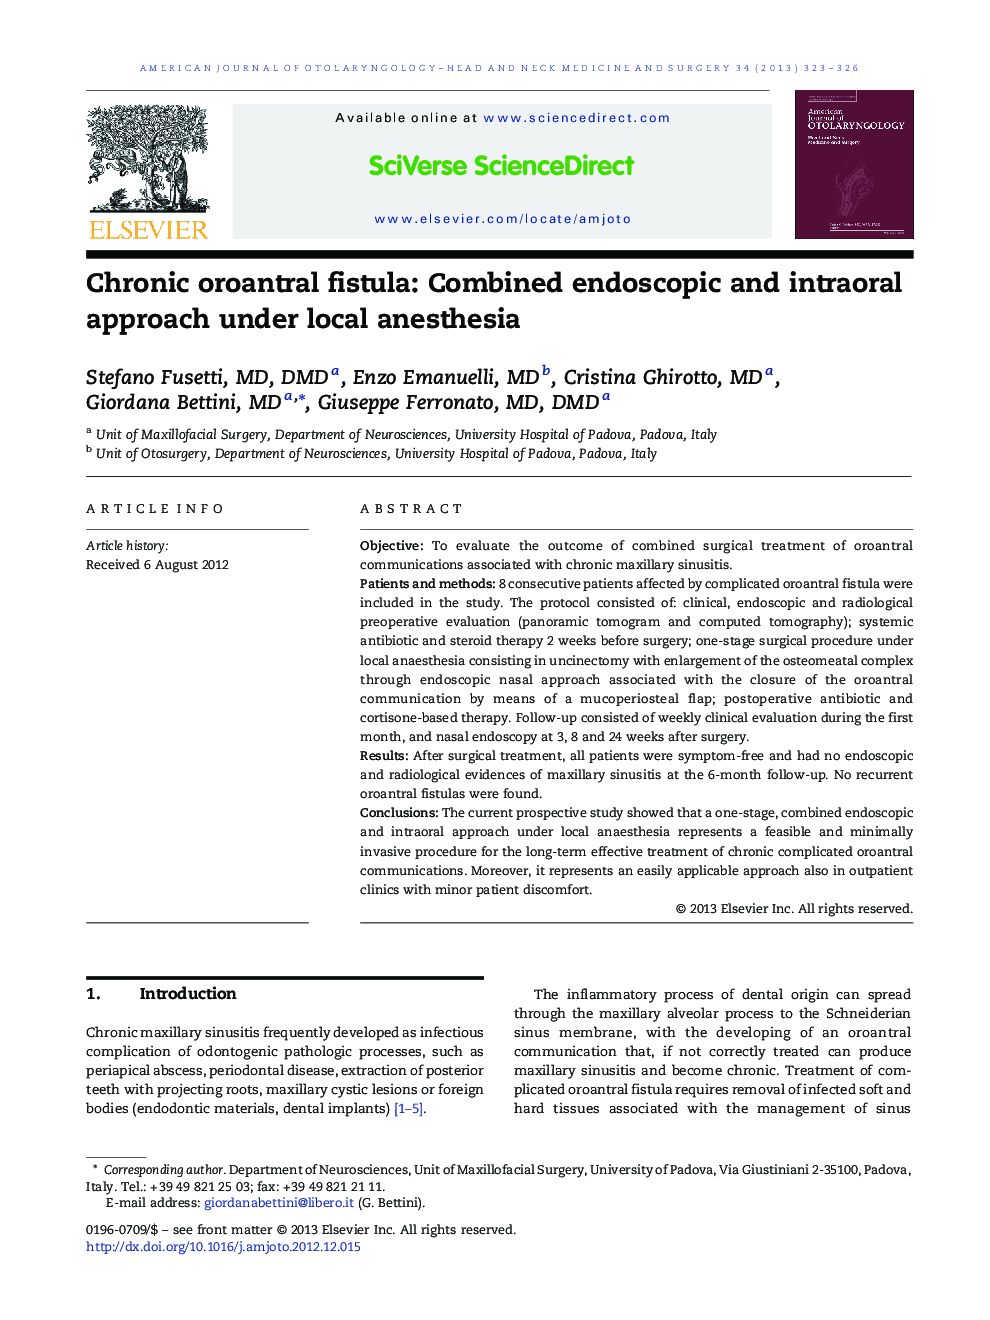 Chronic oroantral fistula: Combined endoscopic and intraoral approach under local anesthesia